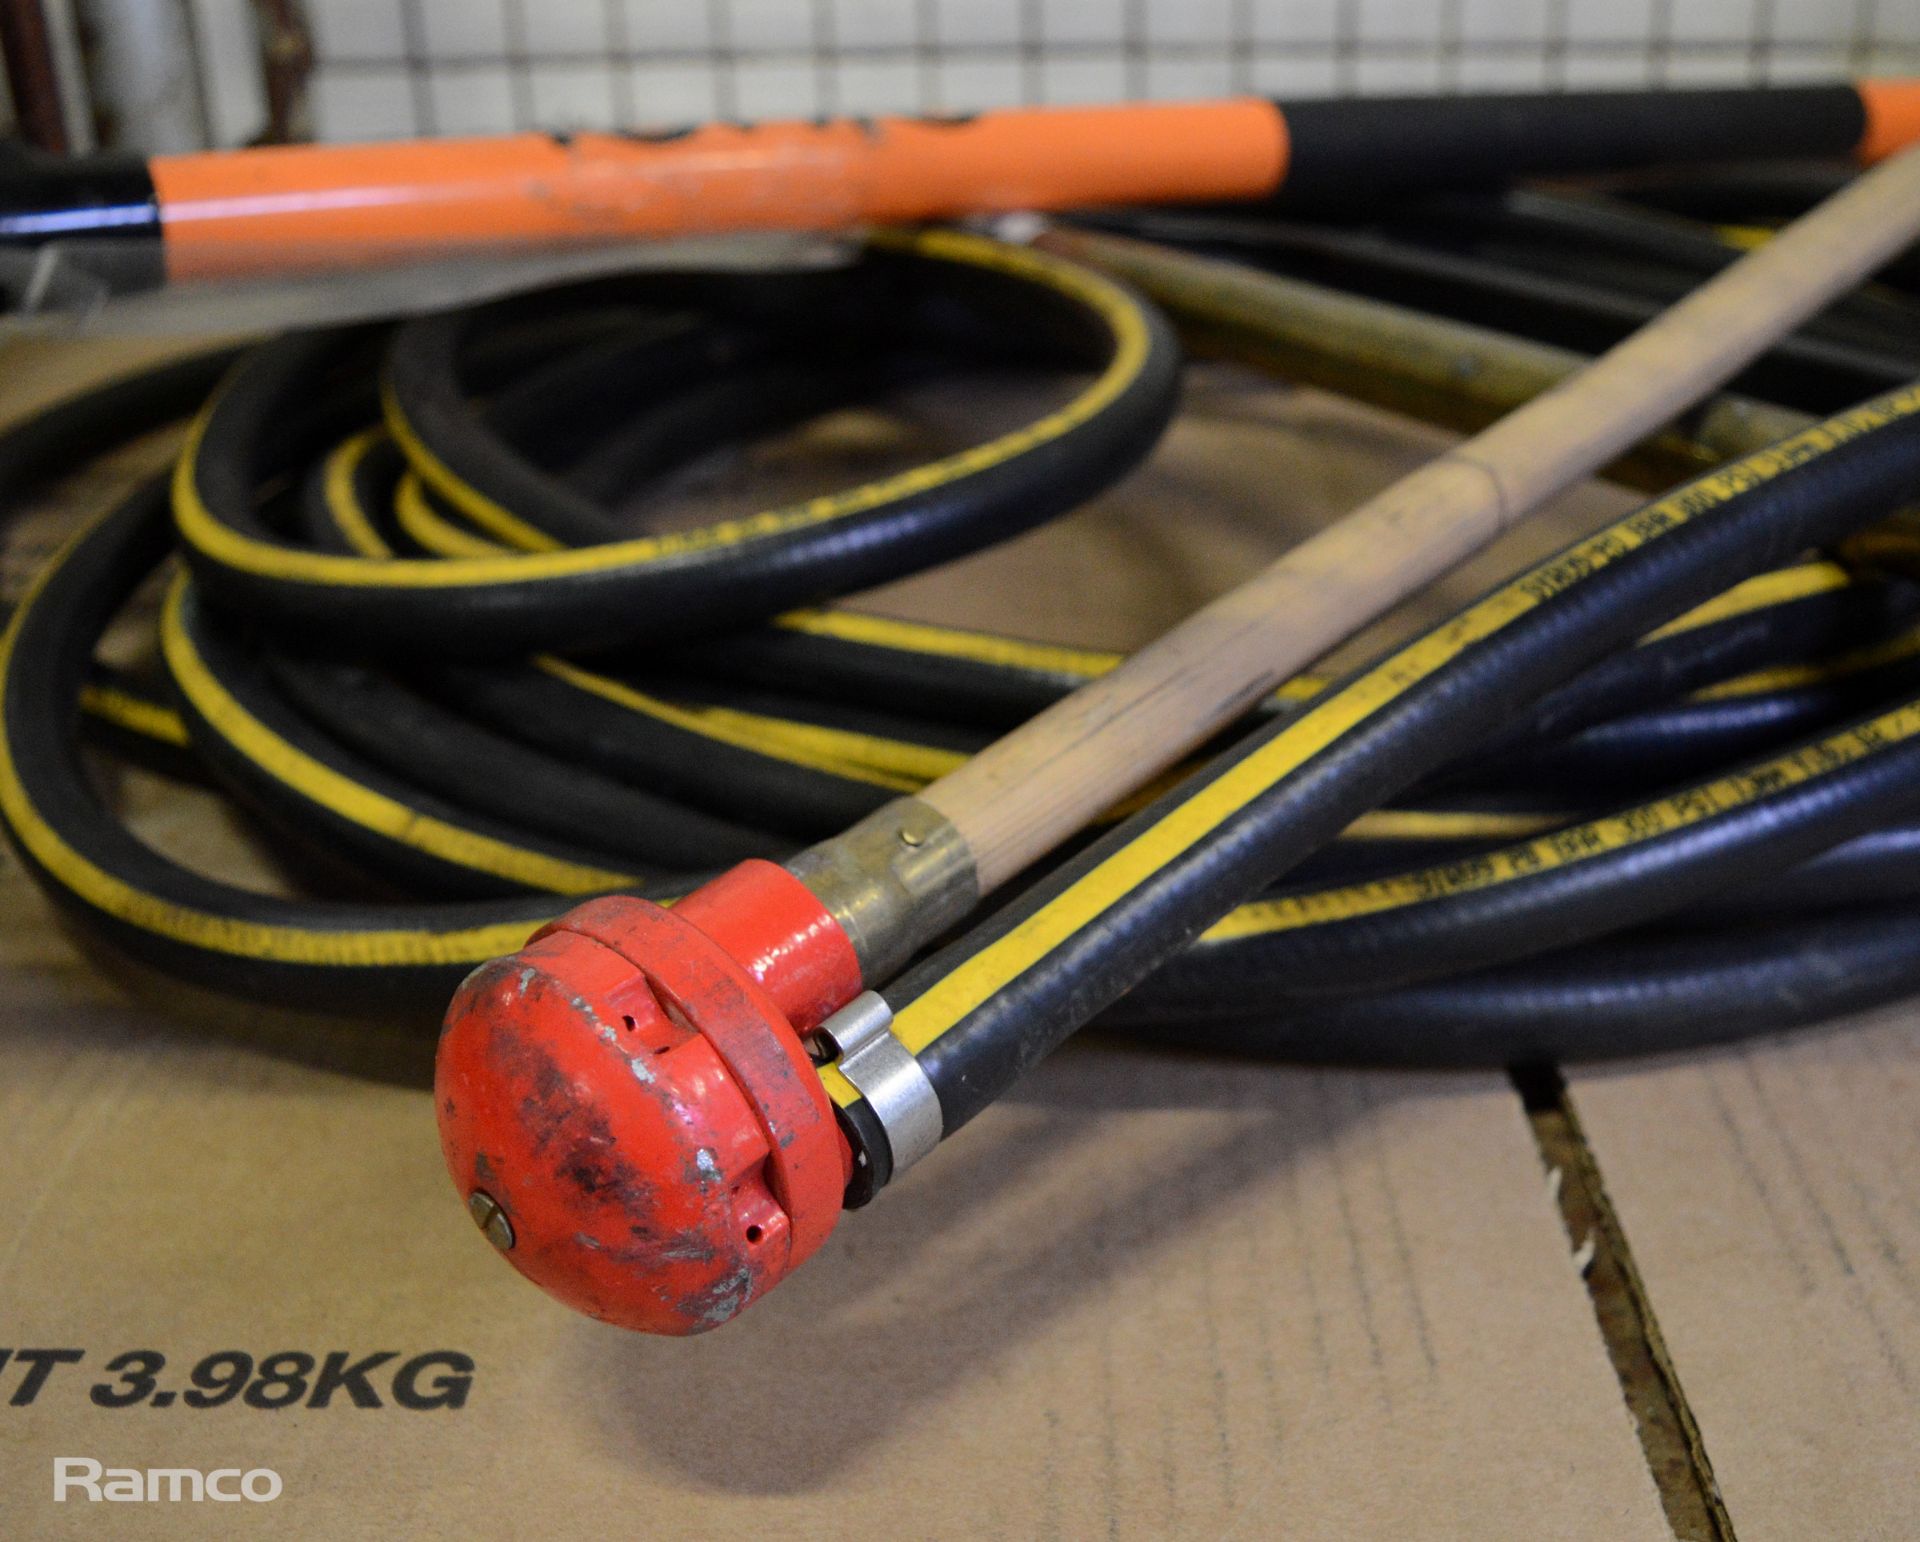 Sirus Black & Yellow 20 Bar 300 PSI Hose with Spray Nozzle and Intake - Image 5 of 5